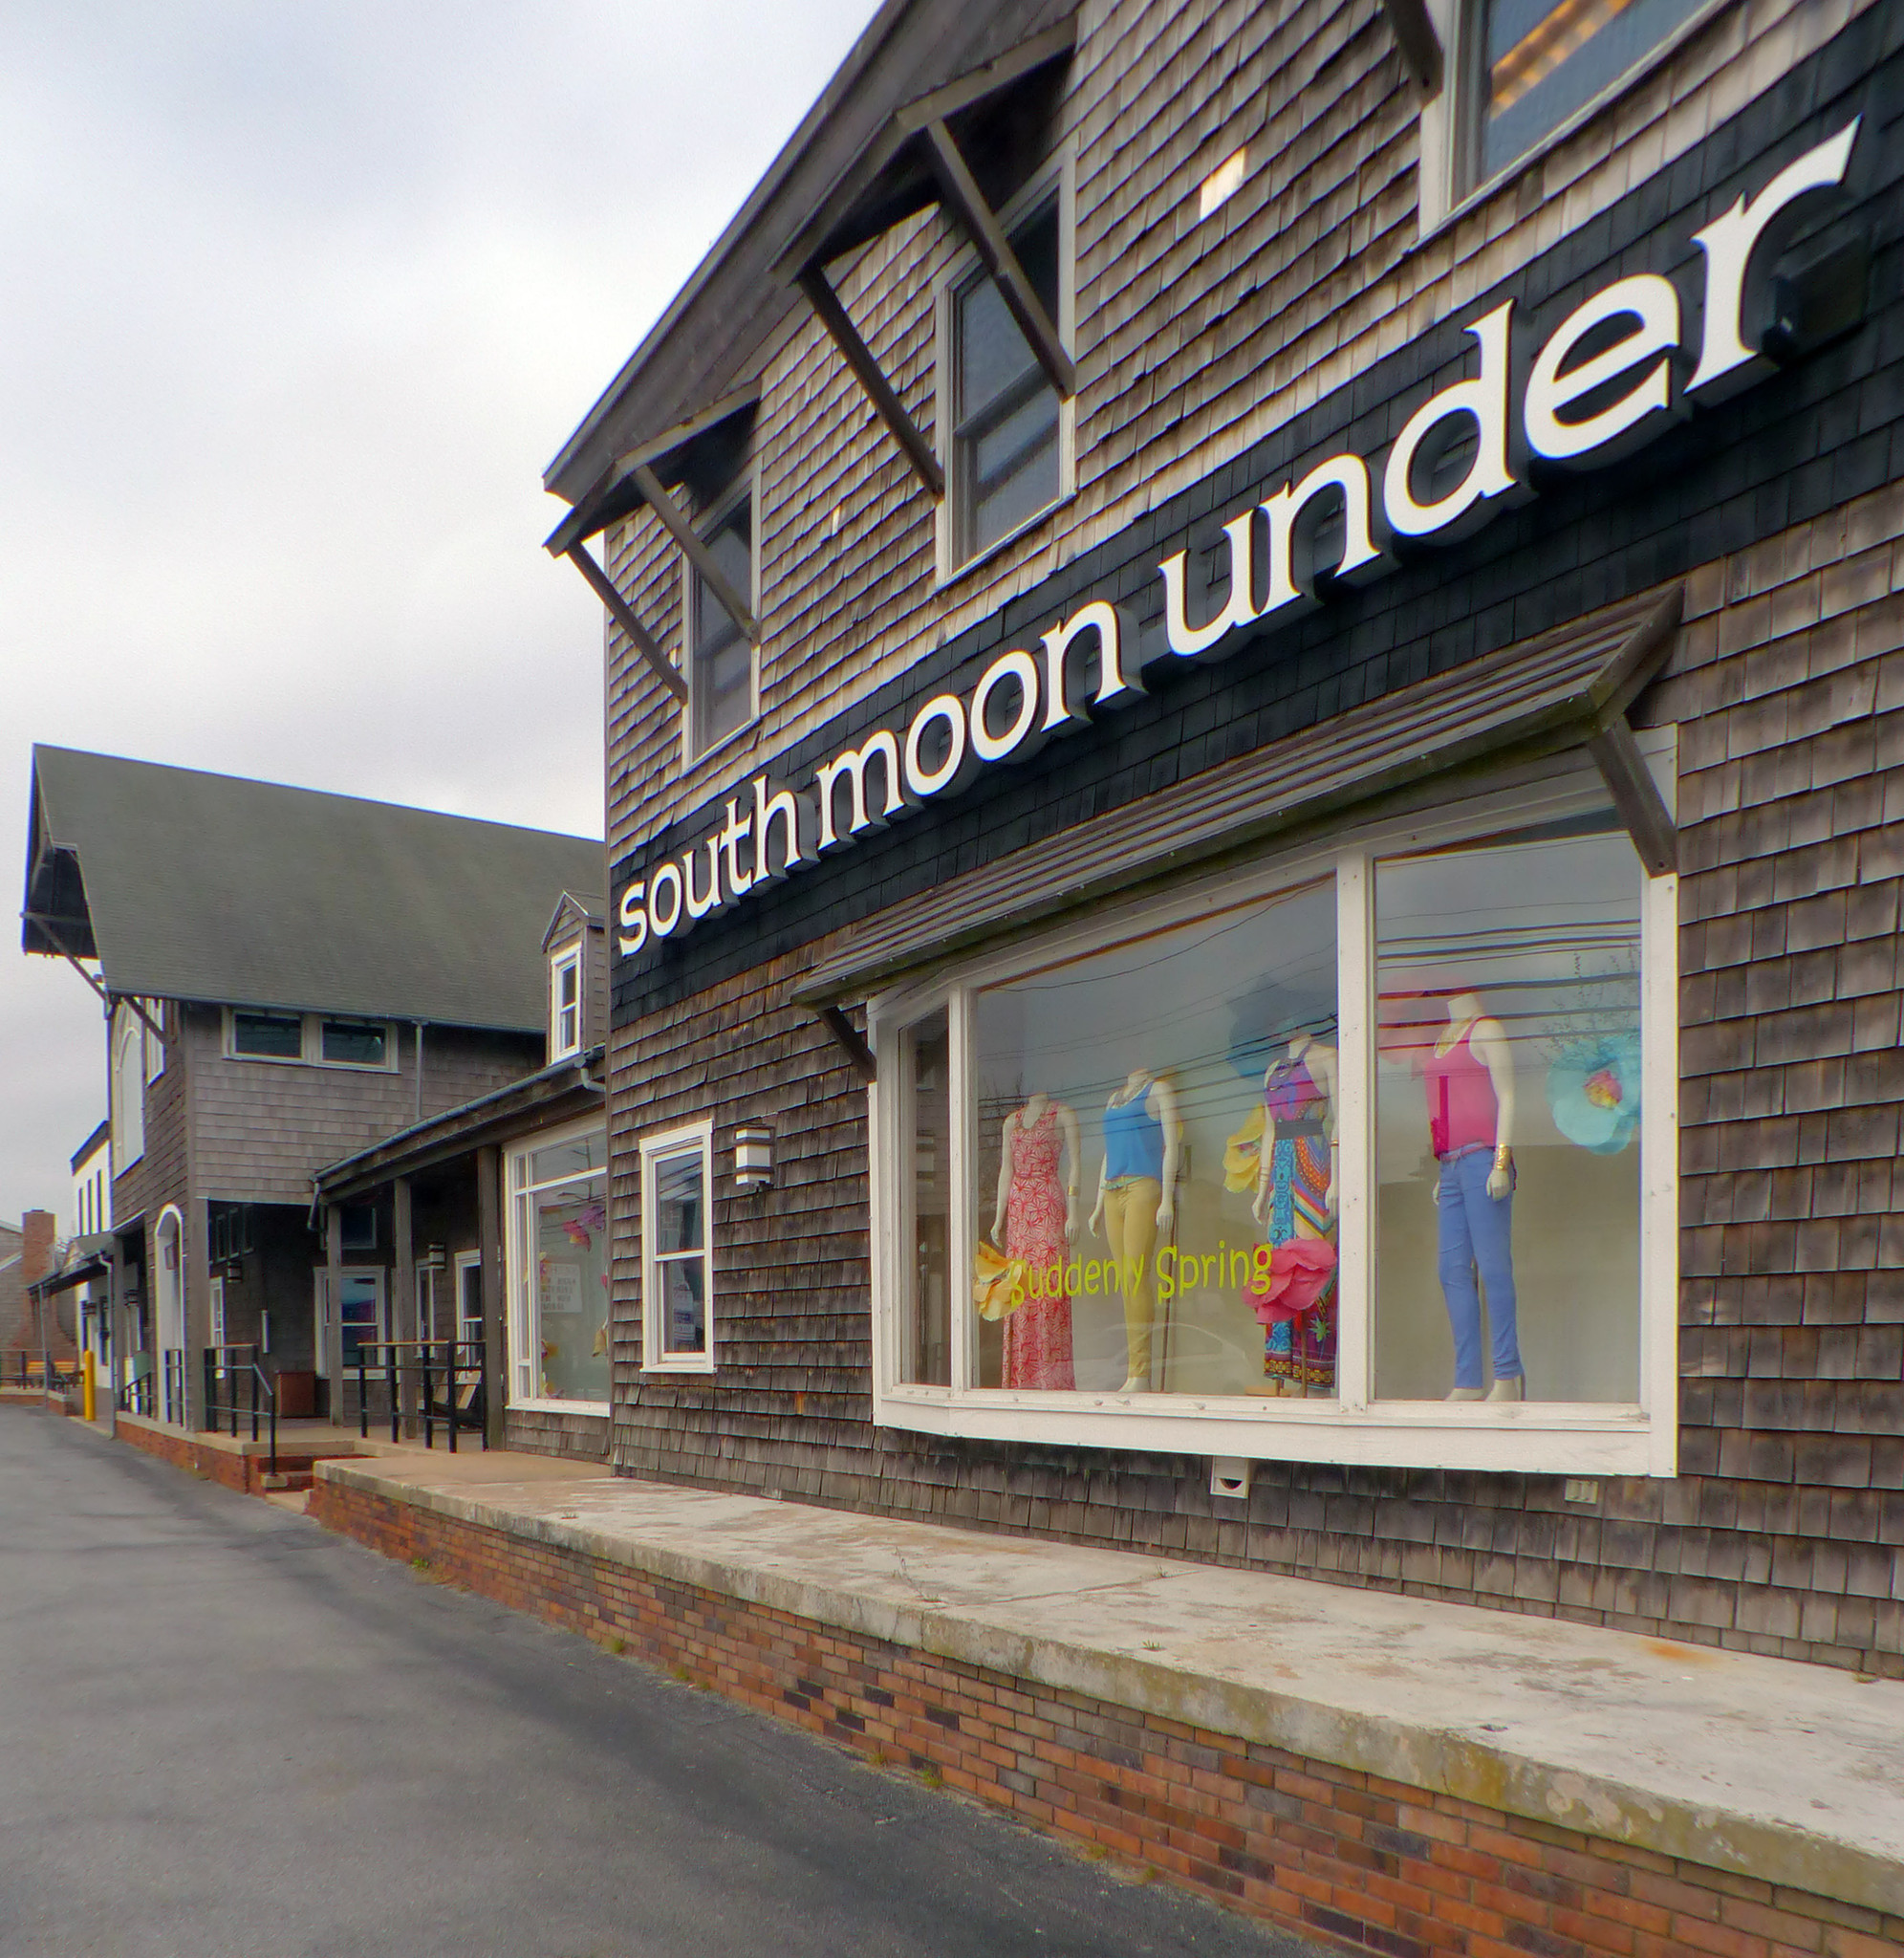 Marylandbased South Moon Under to expand under new owners